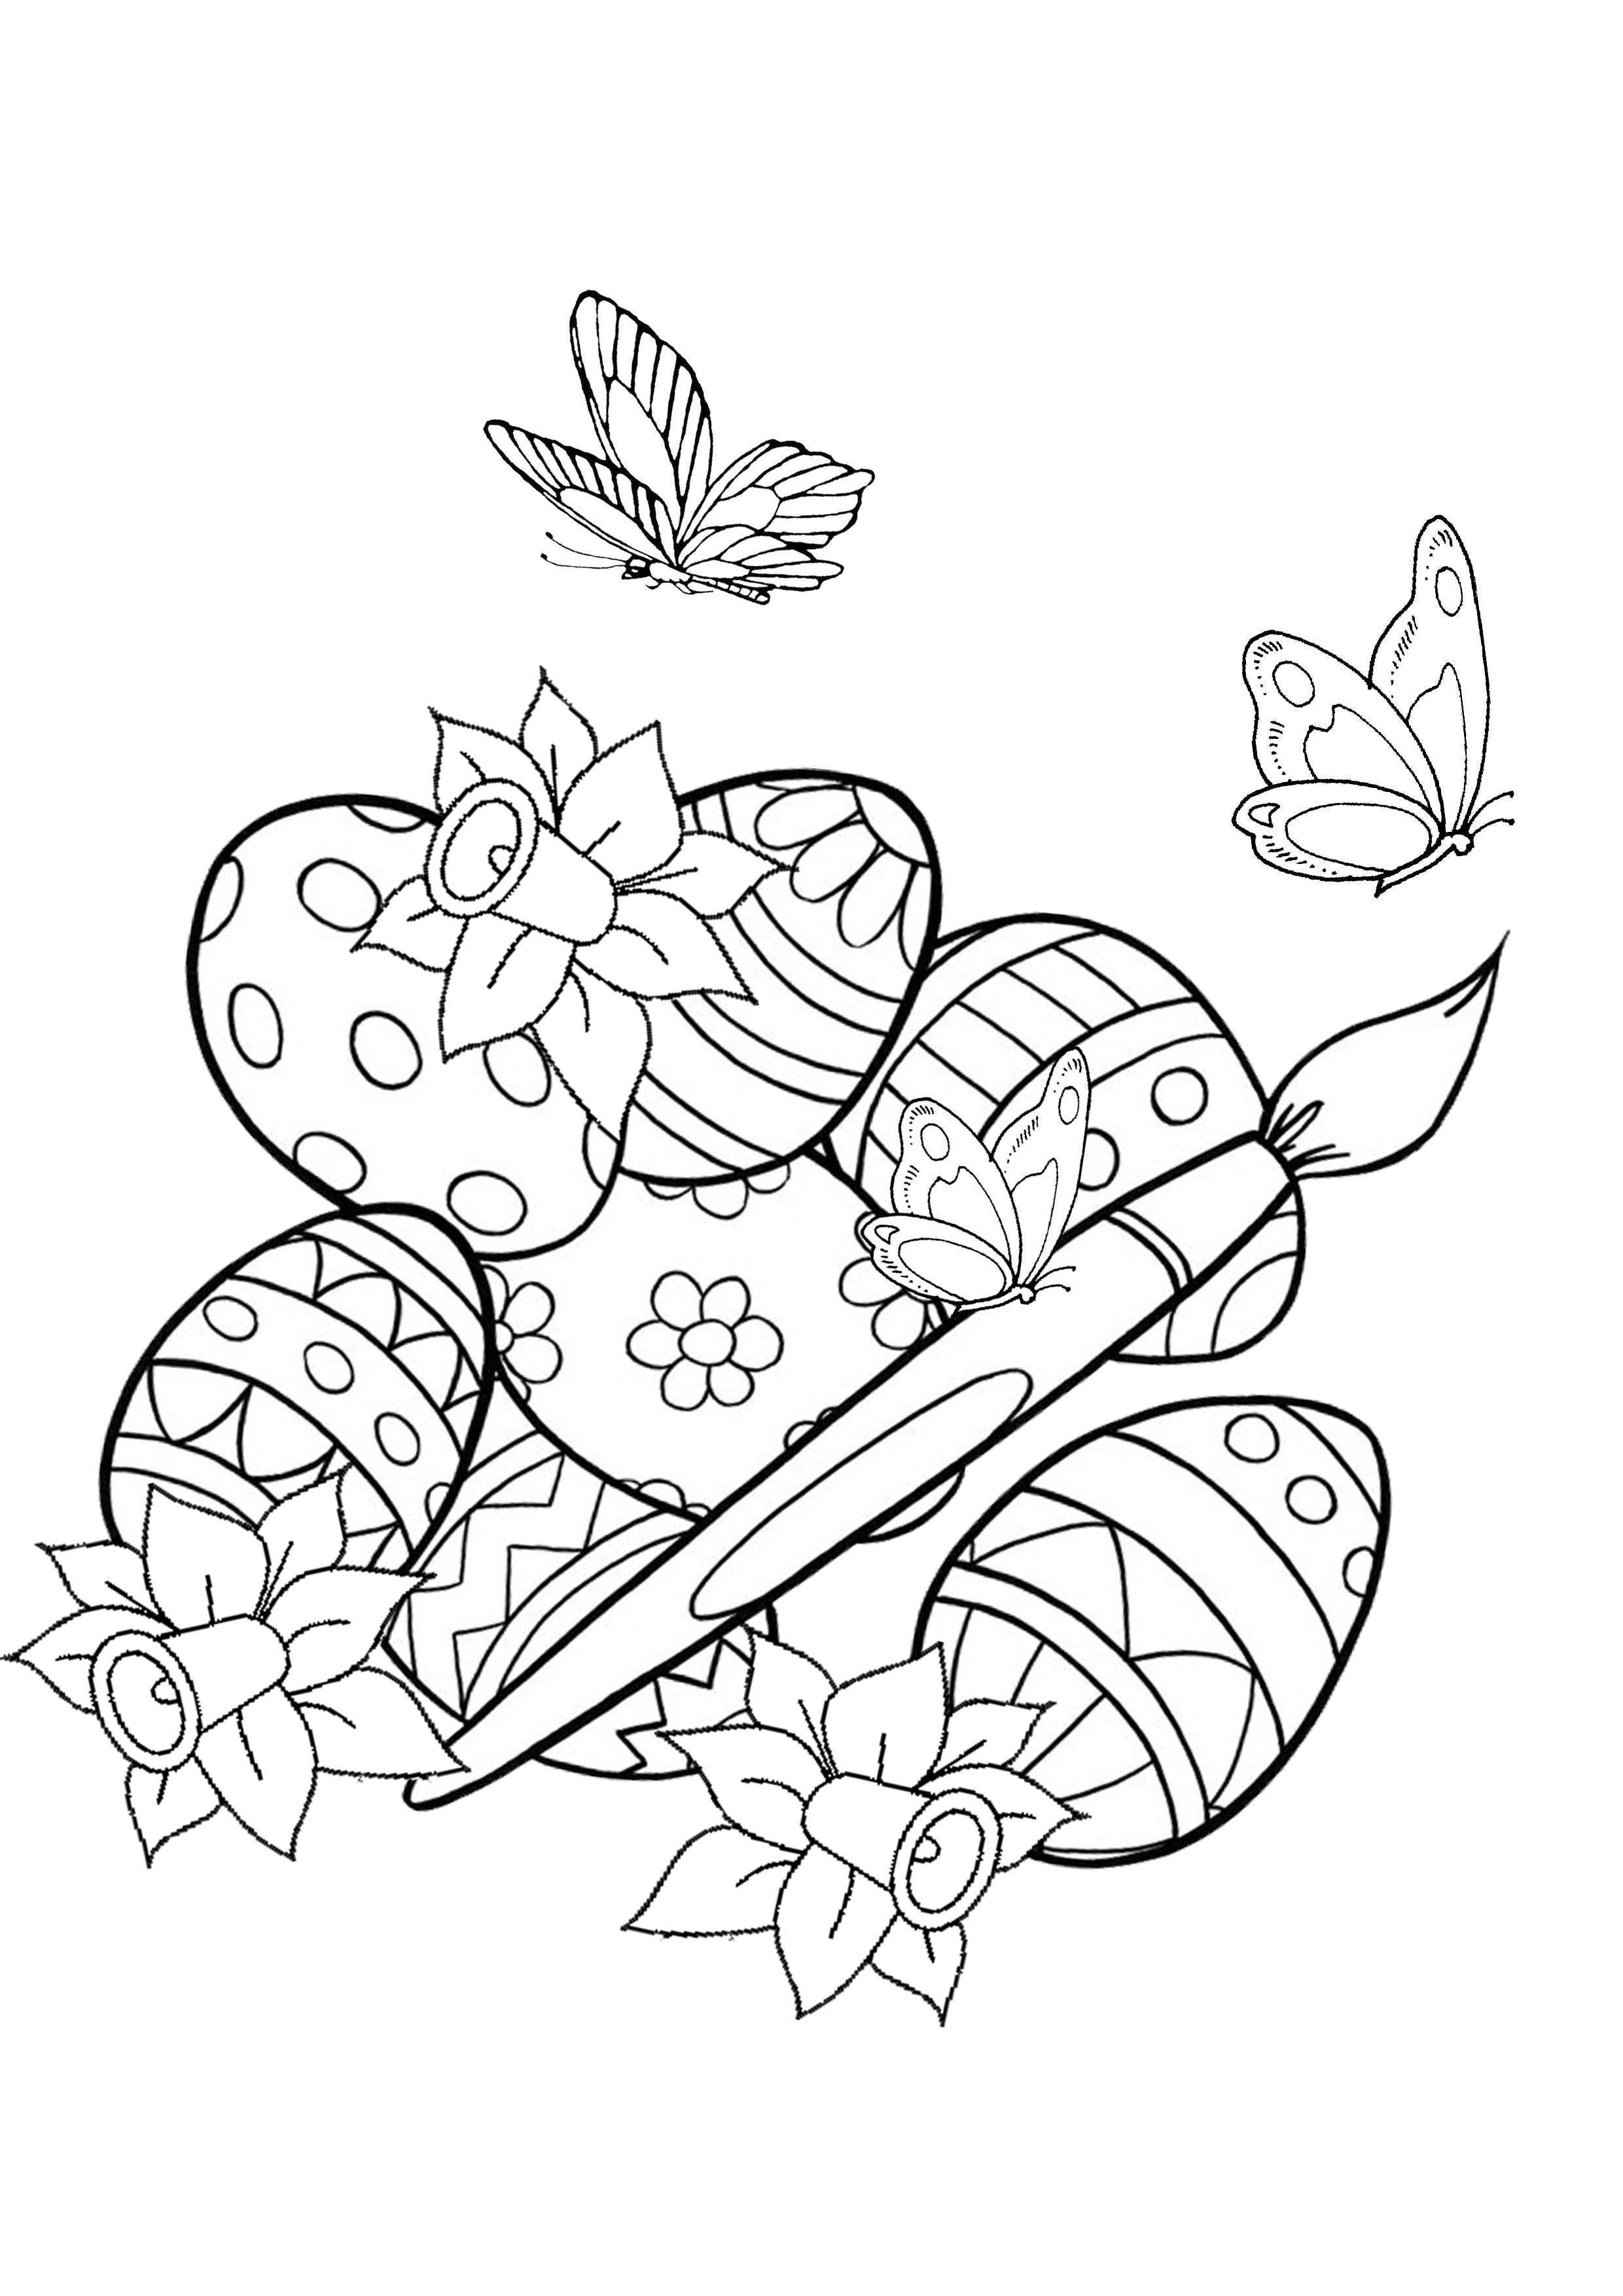 Coloring For Adults Kleuren Voor Volwassenen Spring Coloring Pages Easter Coloring Pa